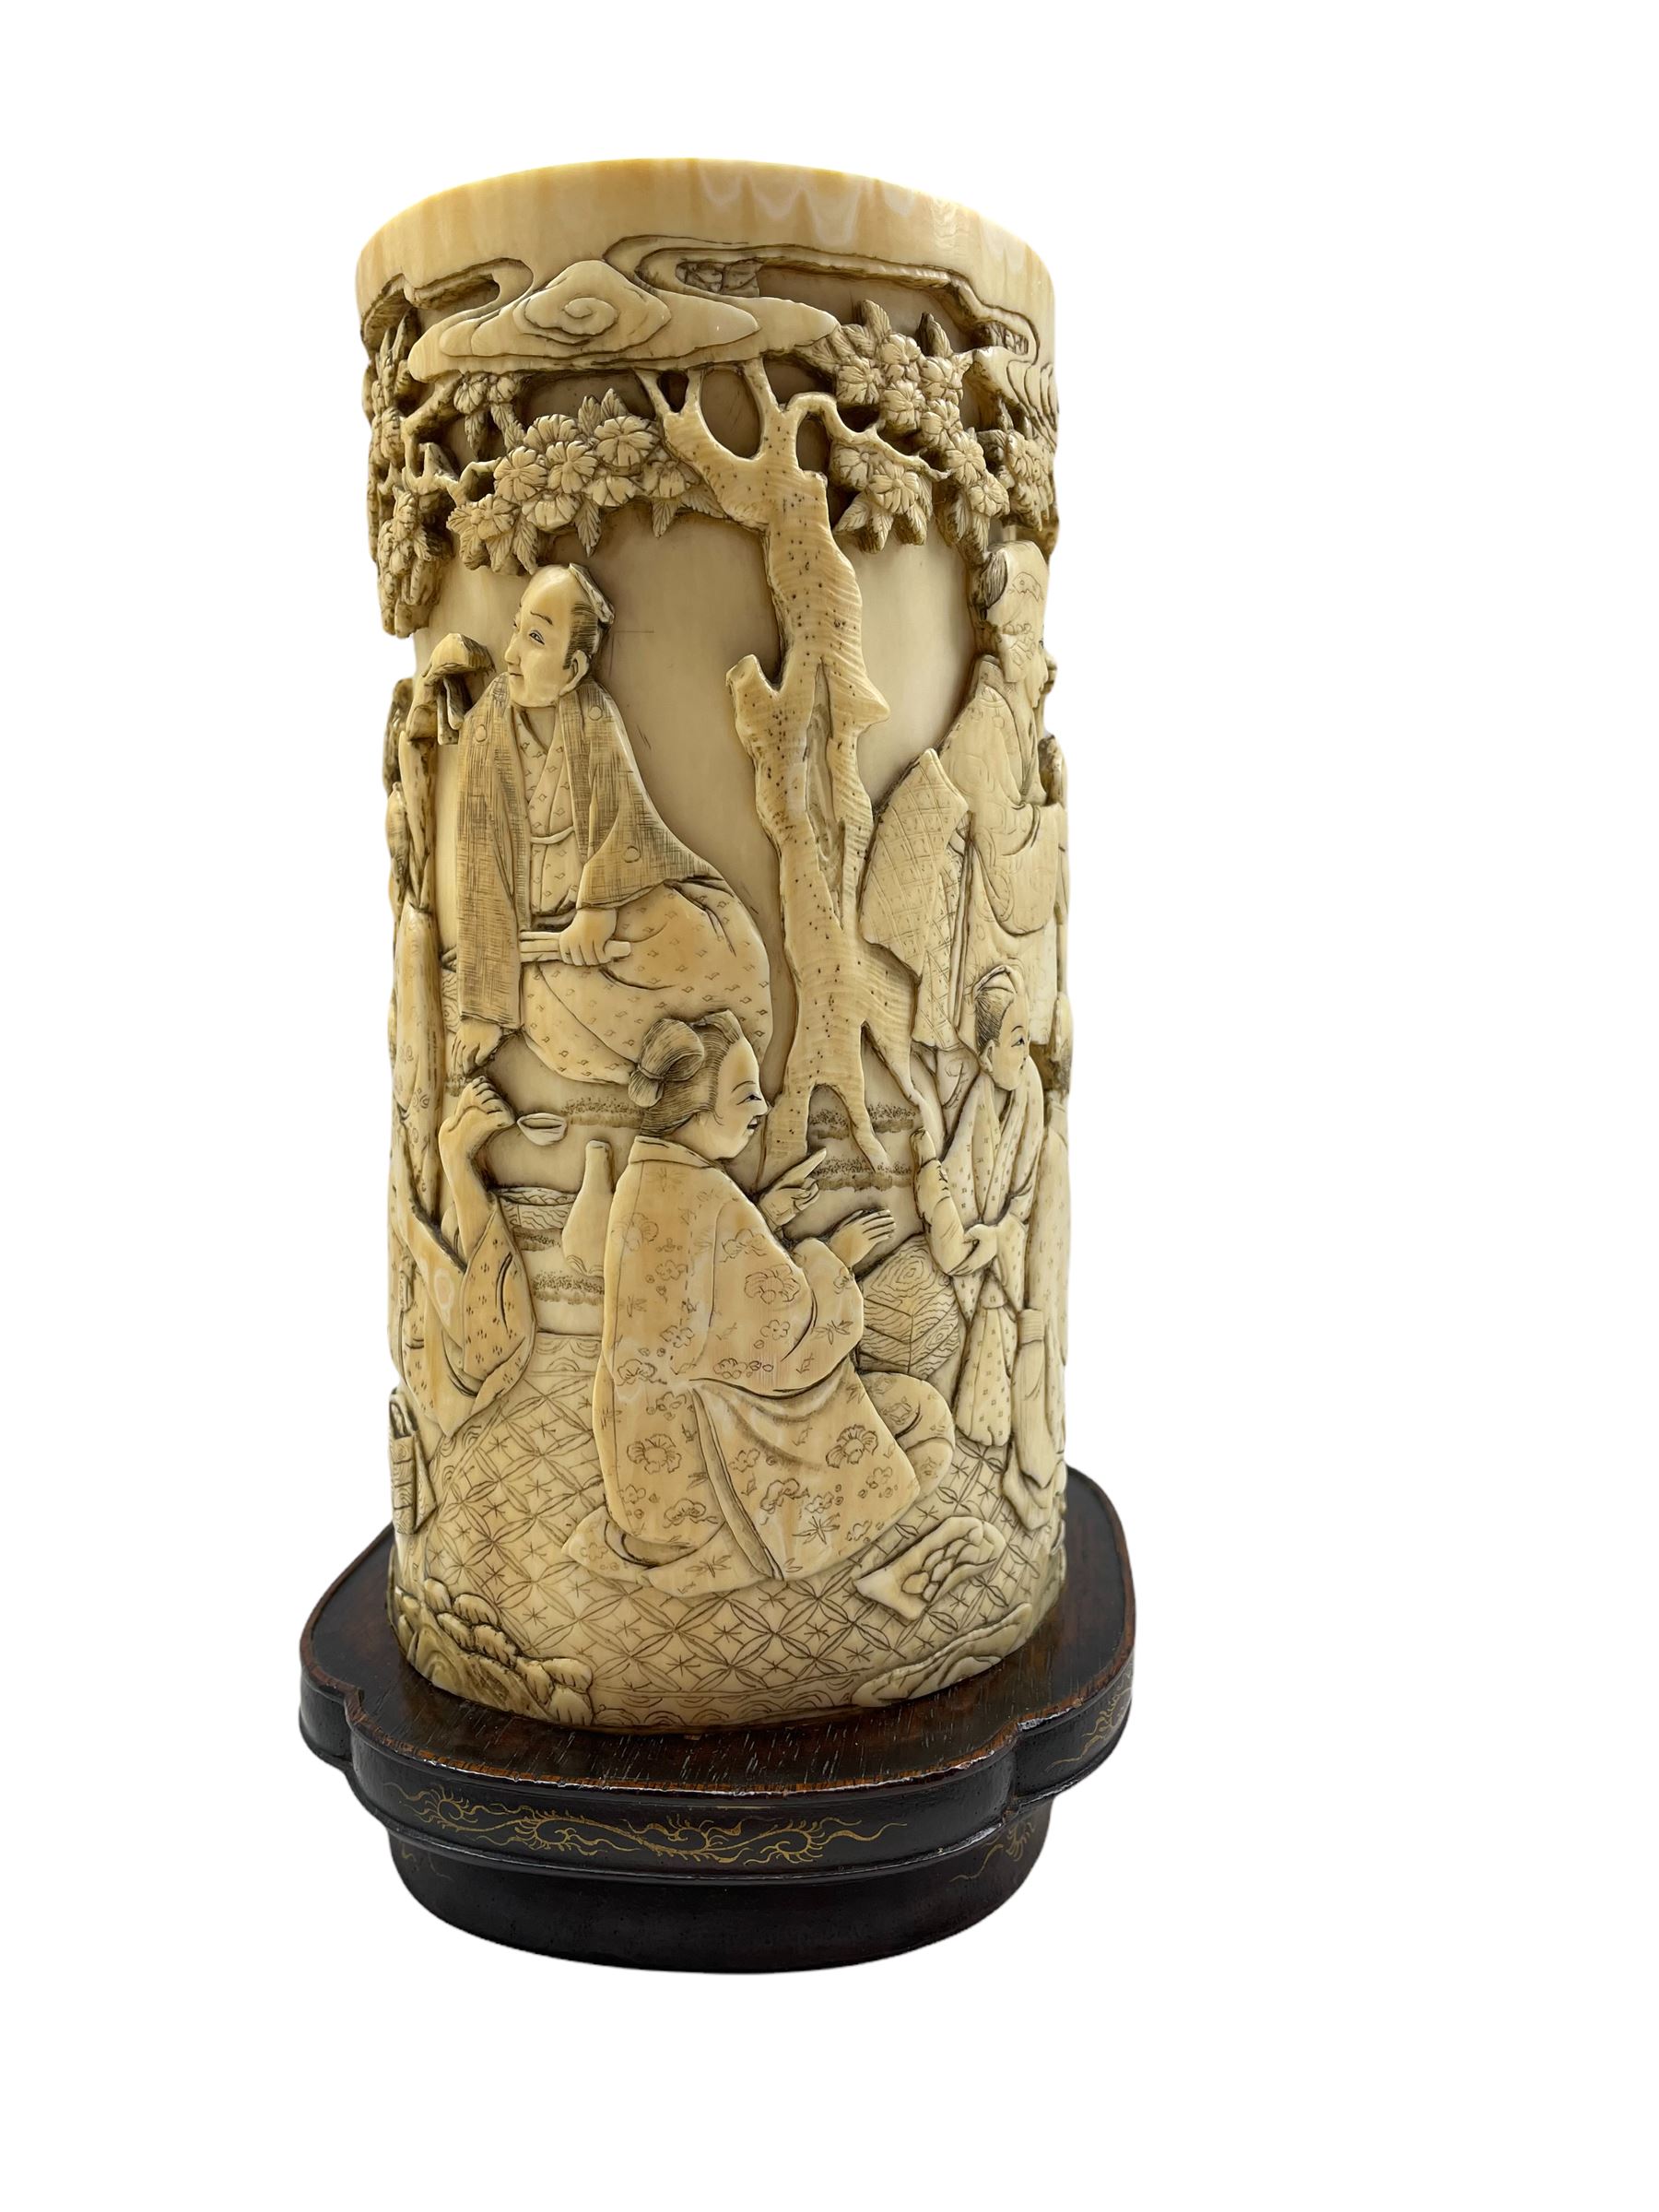 19th century Japanese ivory tusk vase finely carved with a continuous scene of figures gathered outs - Image 4 of 7